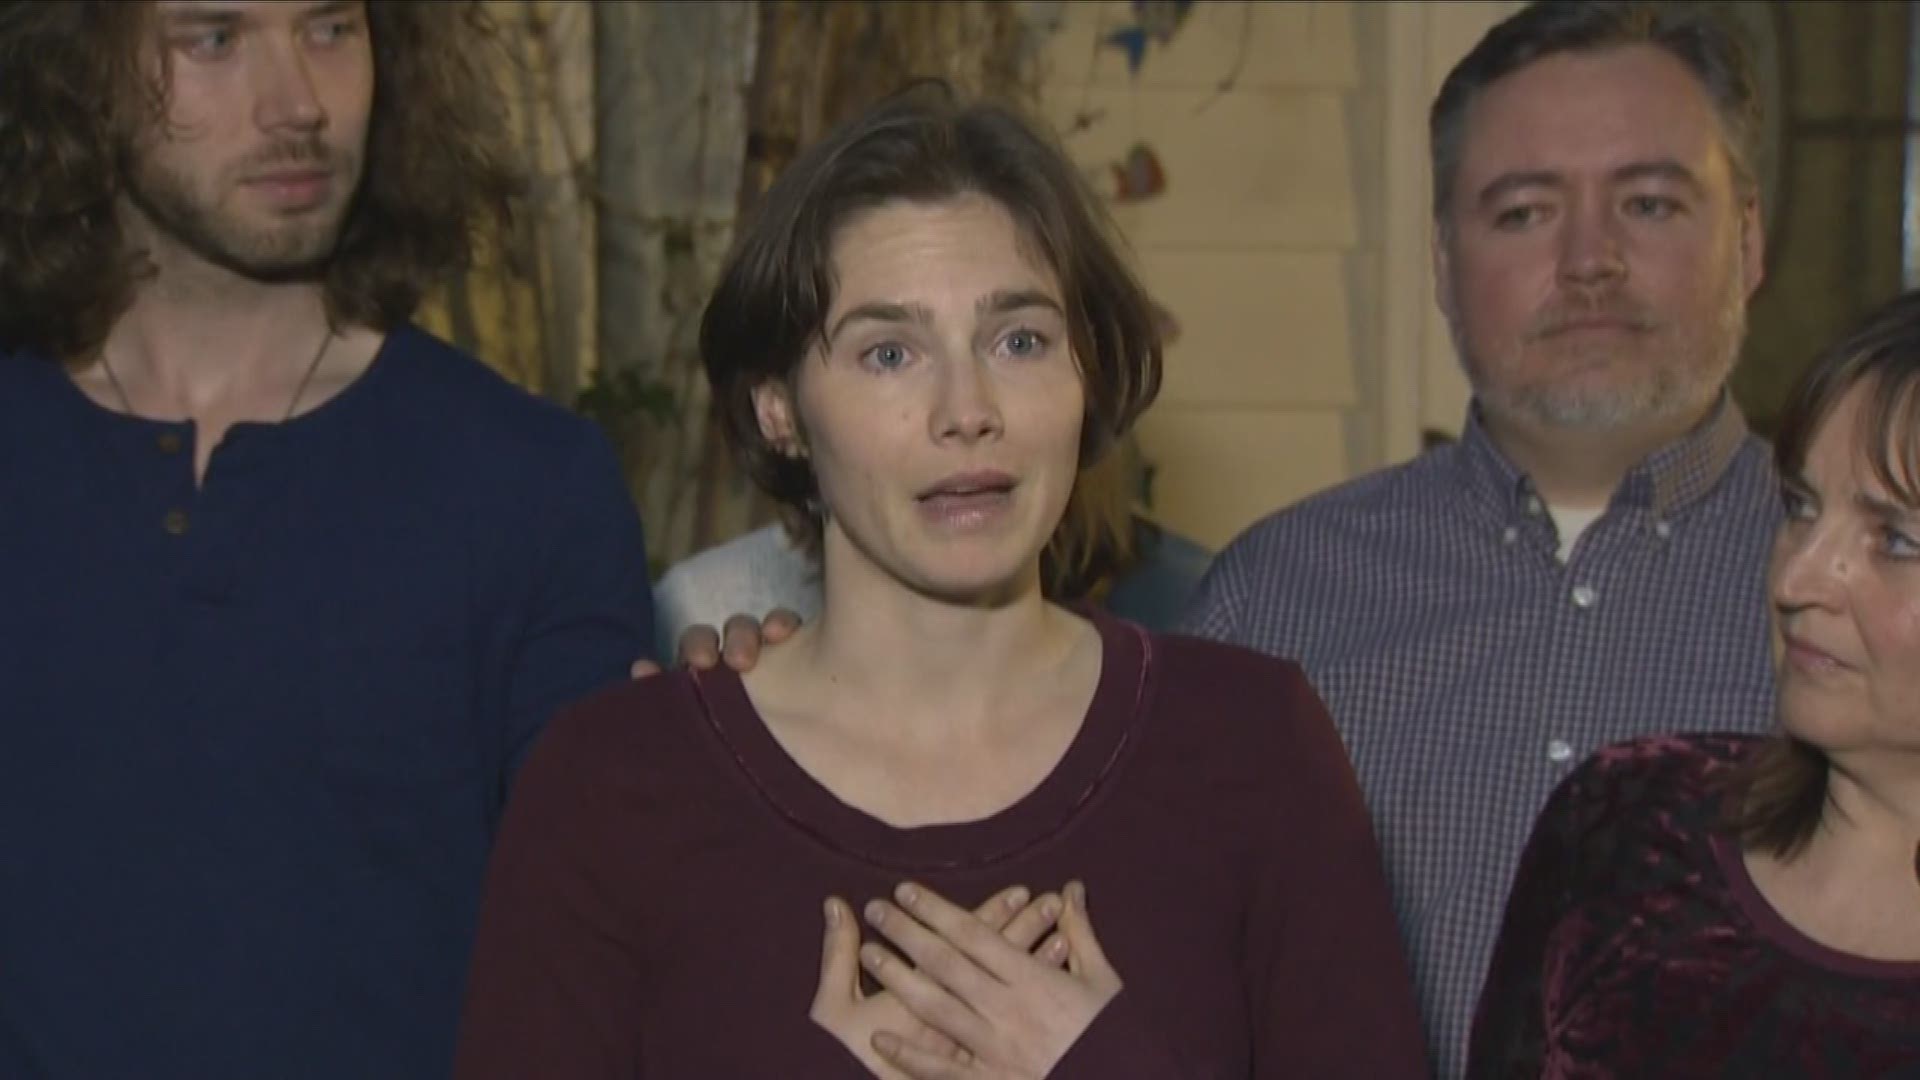 Amanda Knox is returning to Italy this week for the first time since being released from prison.